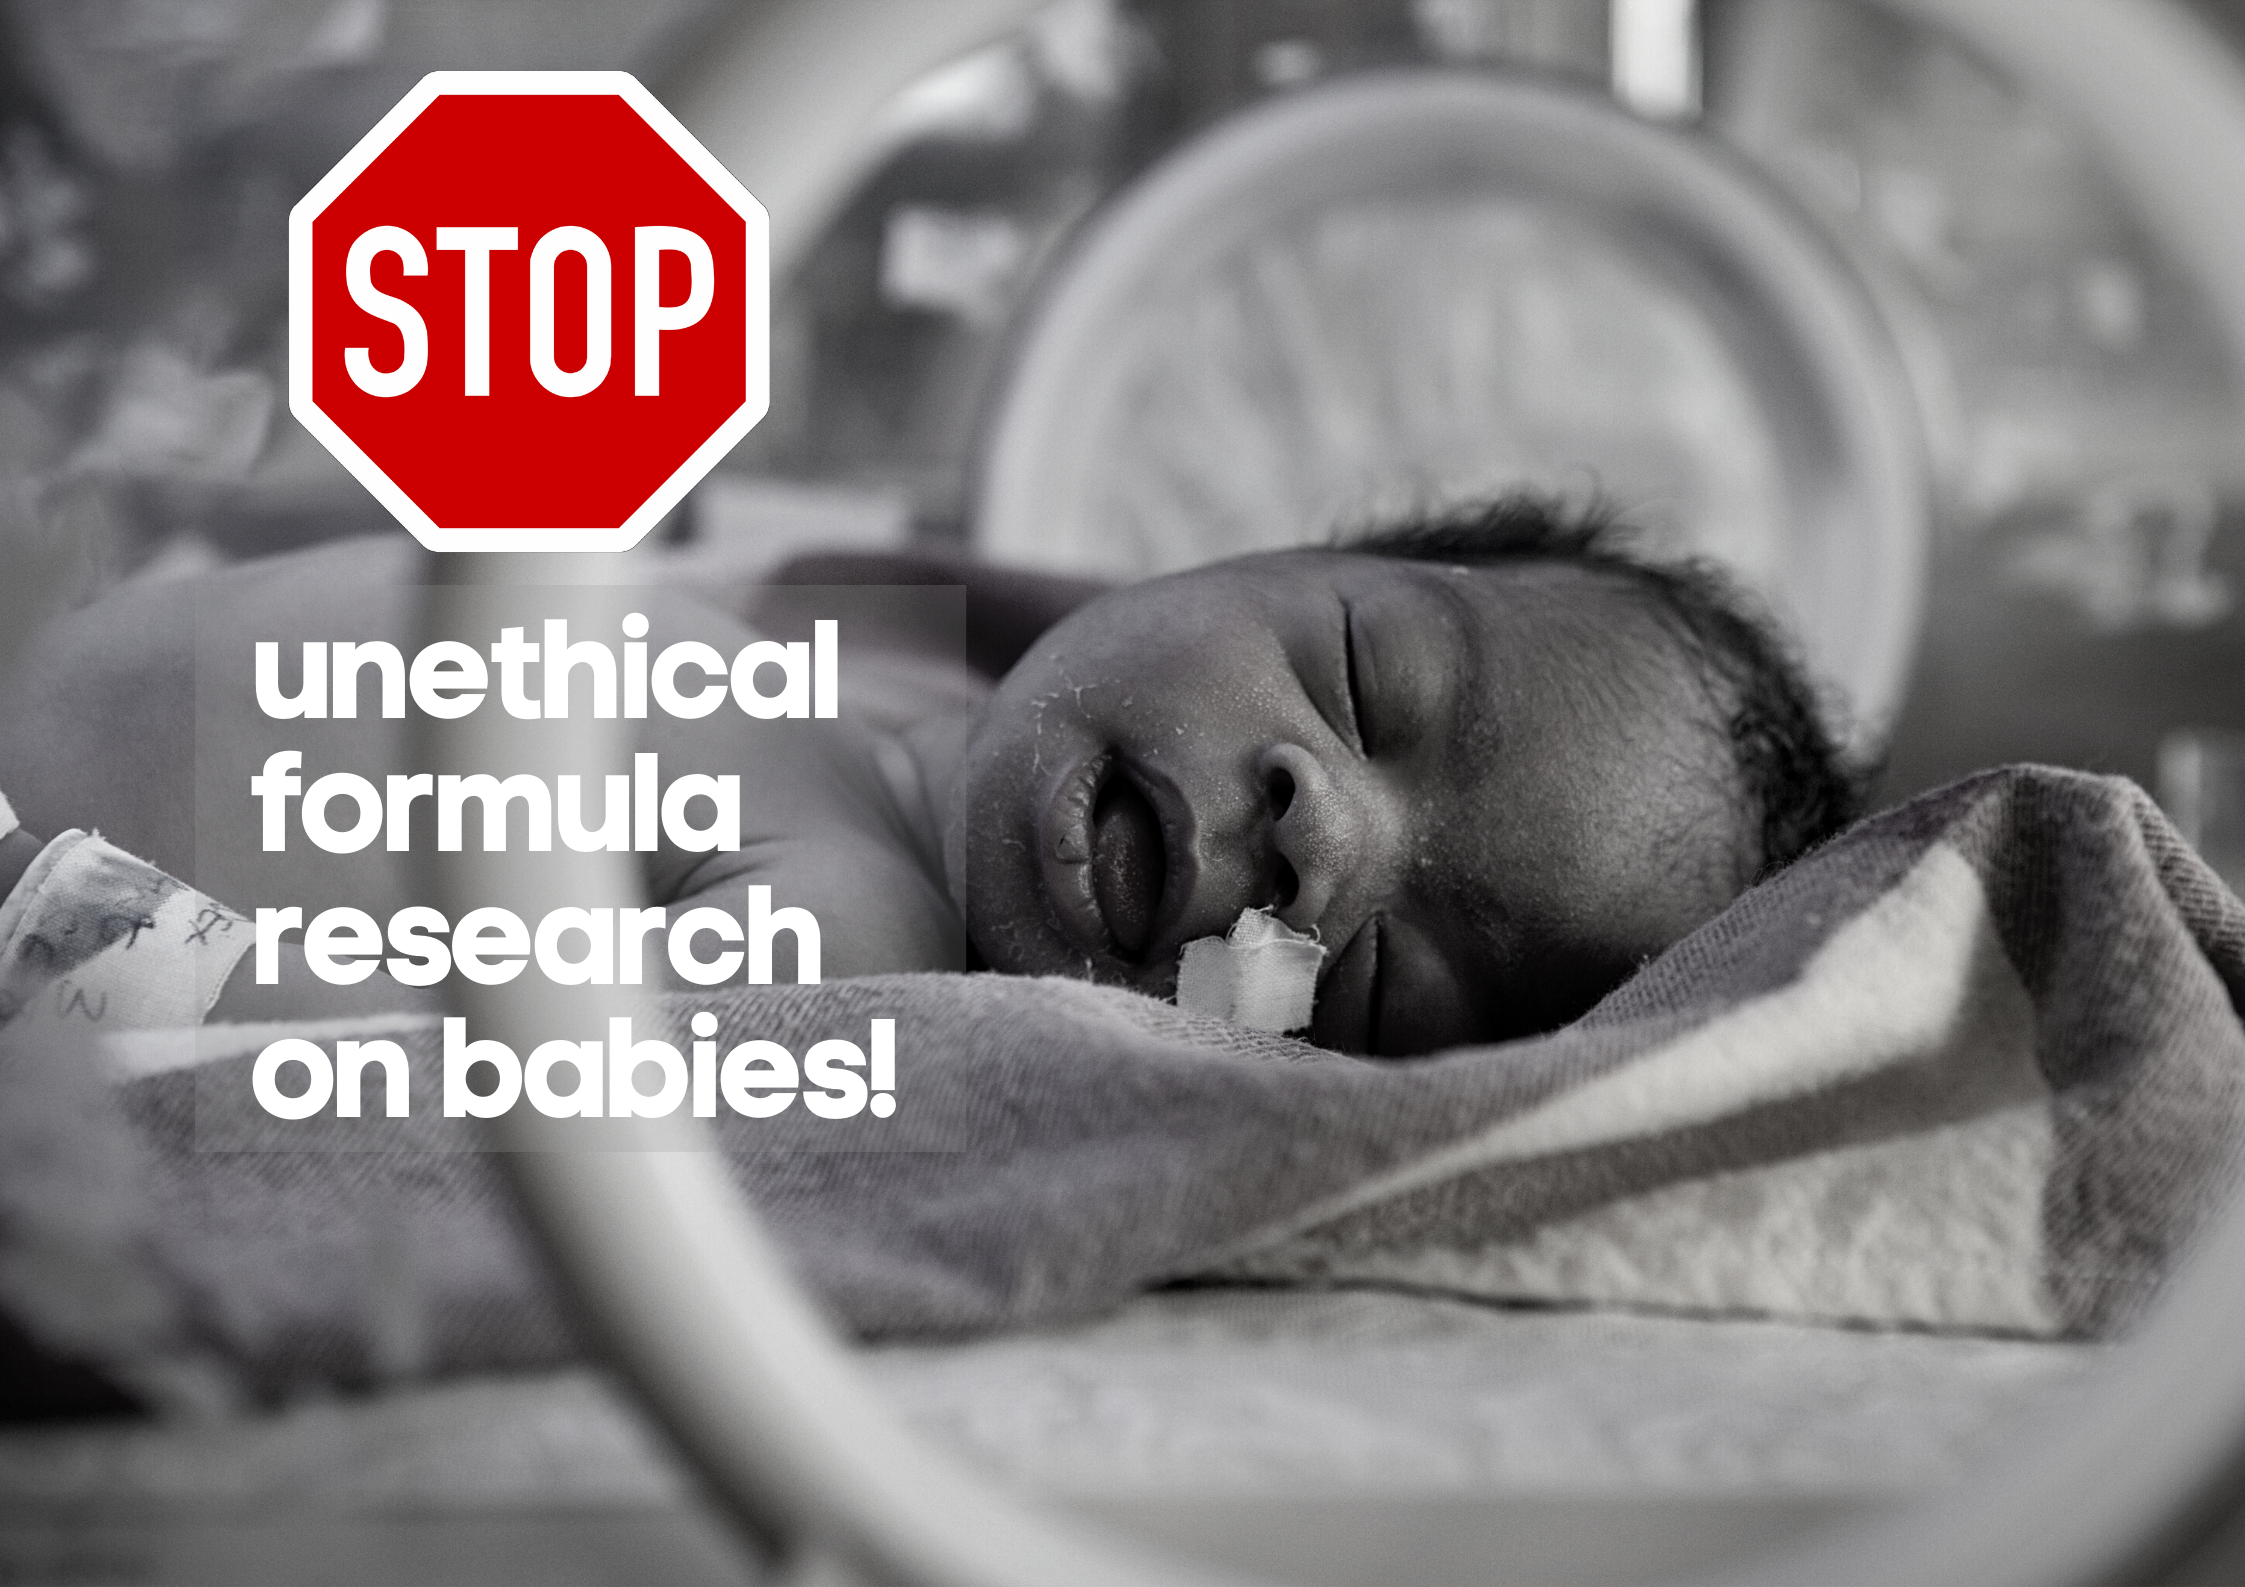 Unethical research on formula must stop